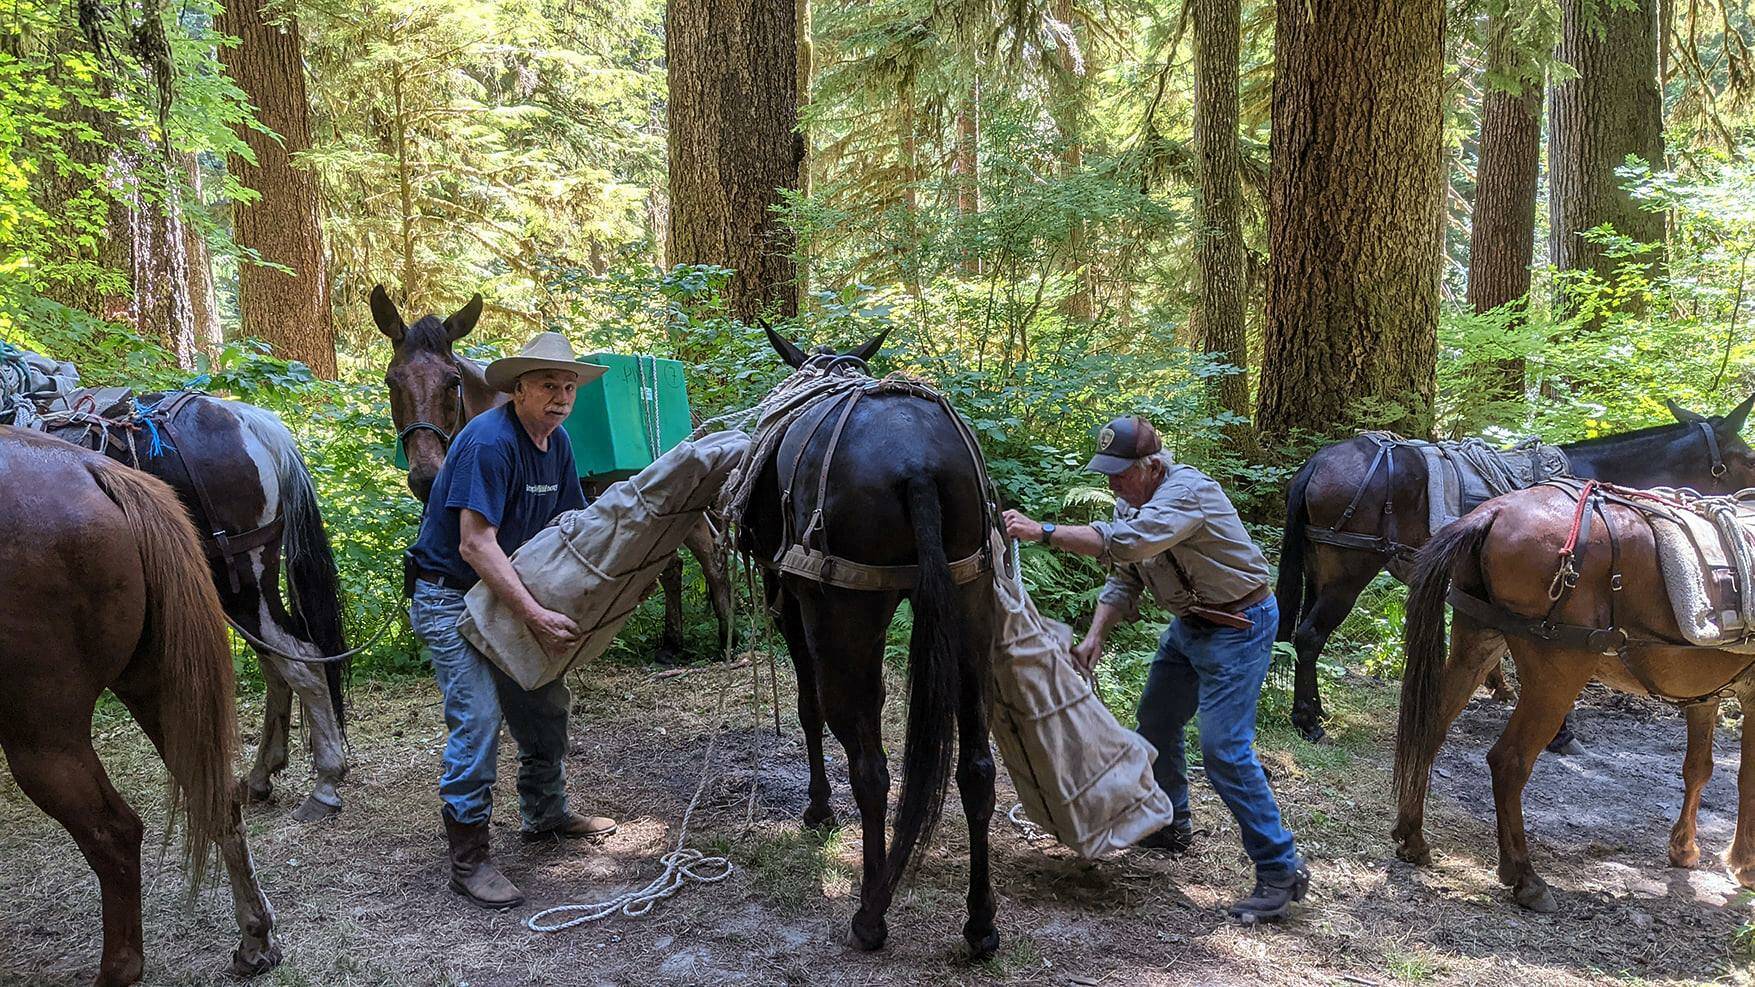 Volunteer packers Harold and Larry with Back Country Horsemen remove many bundles containing the crew’s gear from a mule after a 17-mile ride to the backcountry worksite.